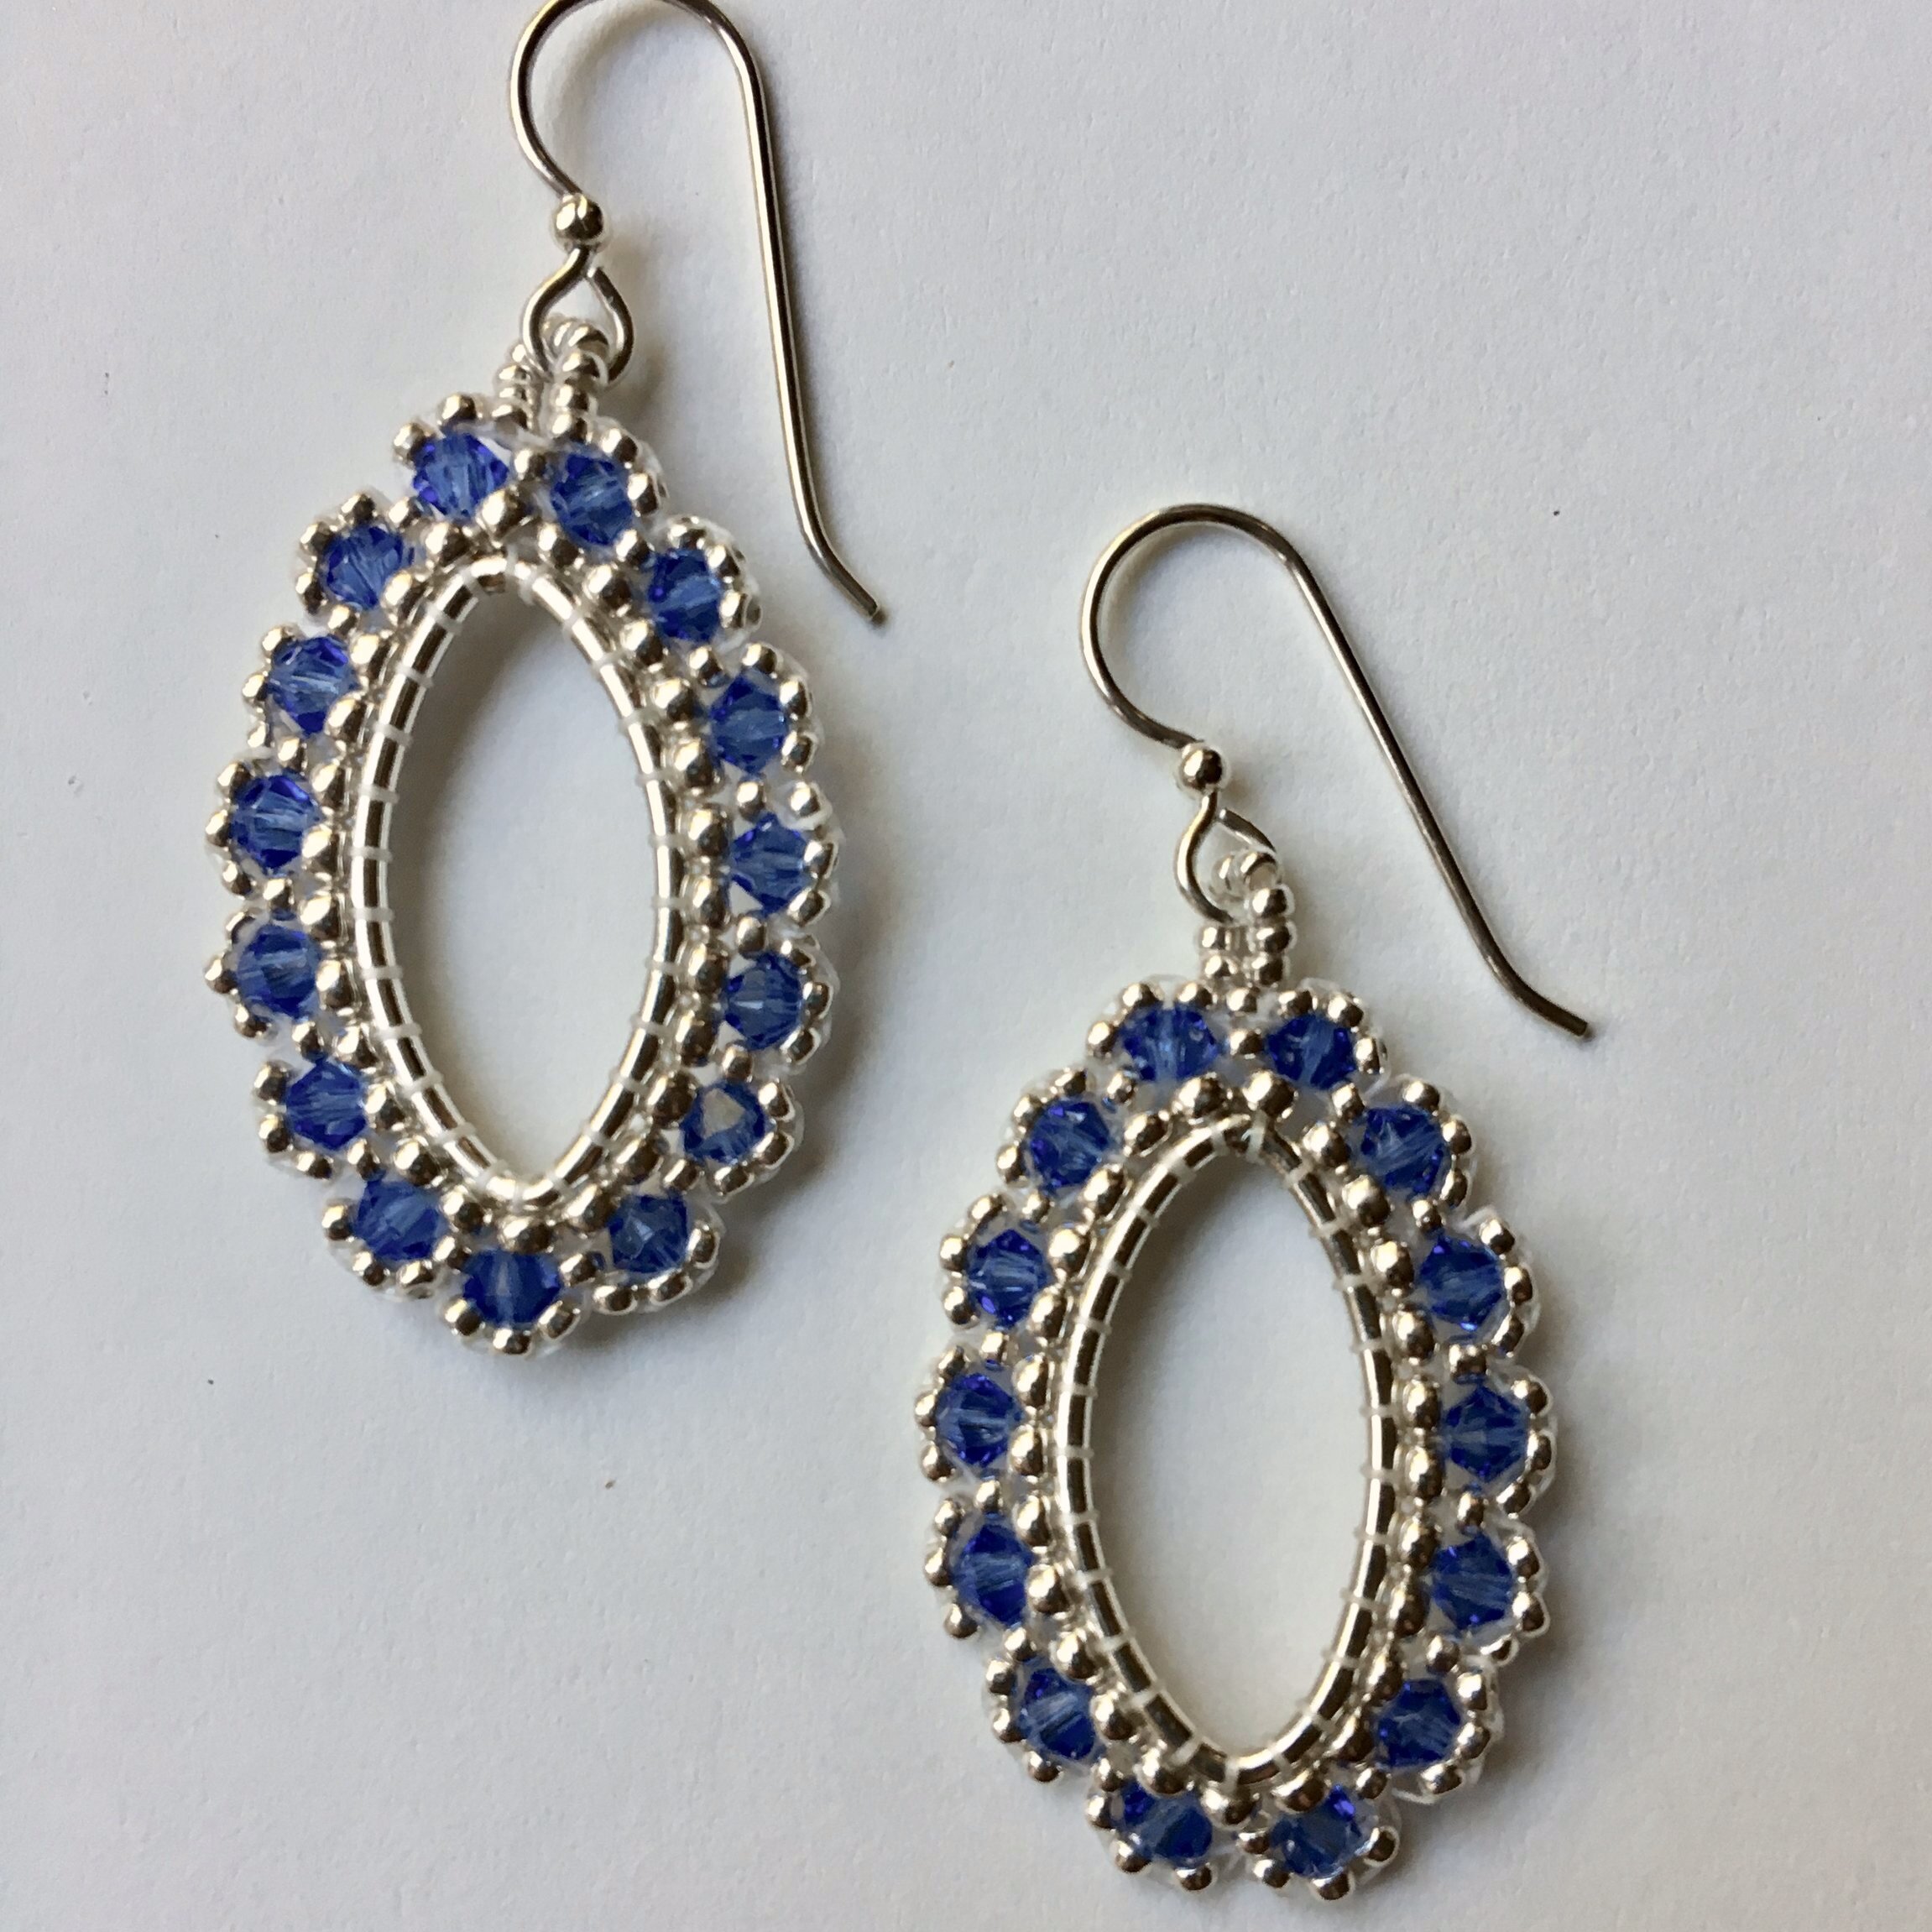 NEW! Silver and Sapphire Crystal Marquise Earrings